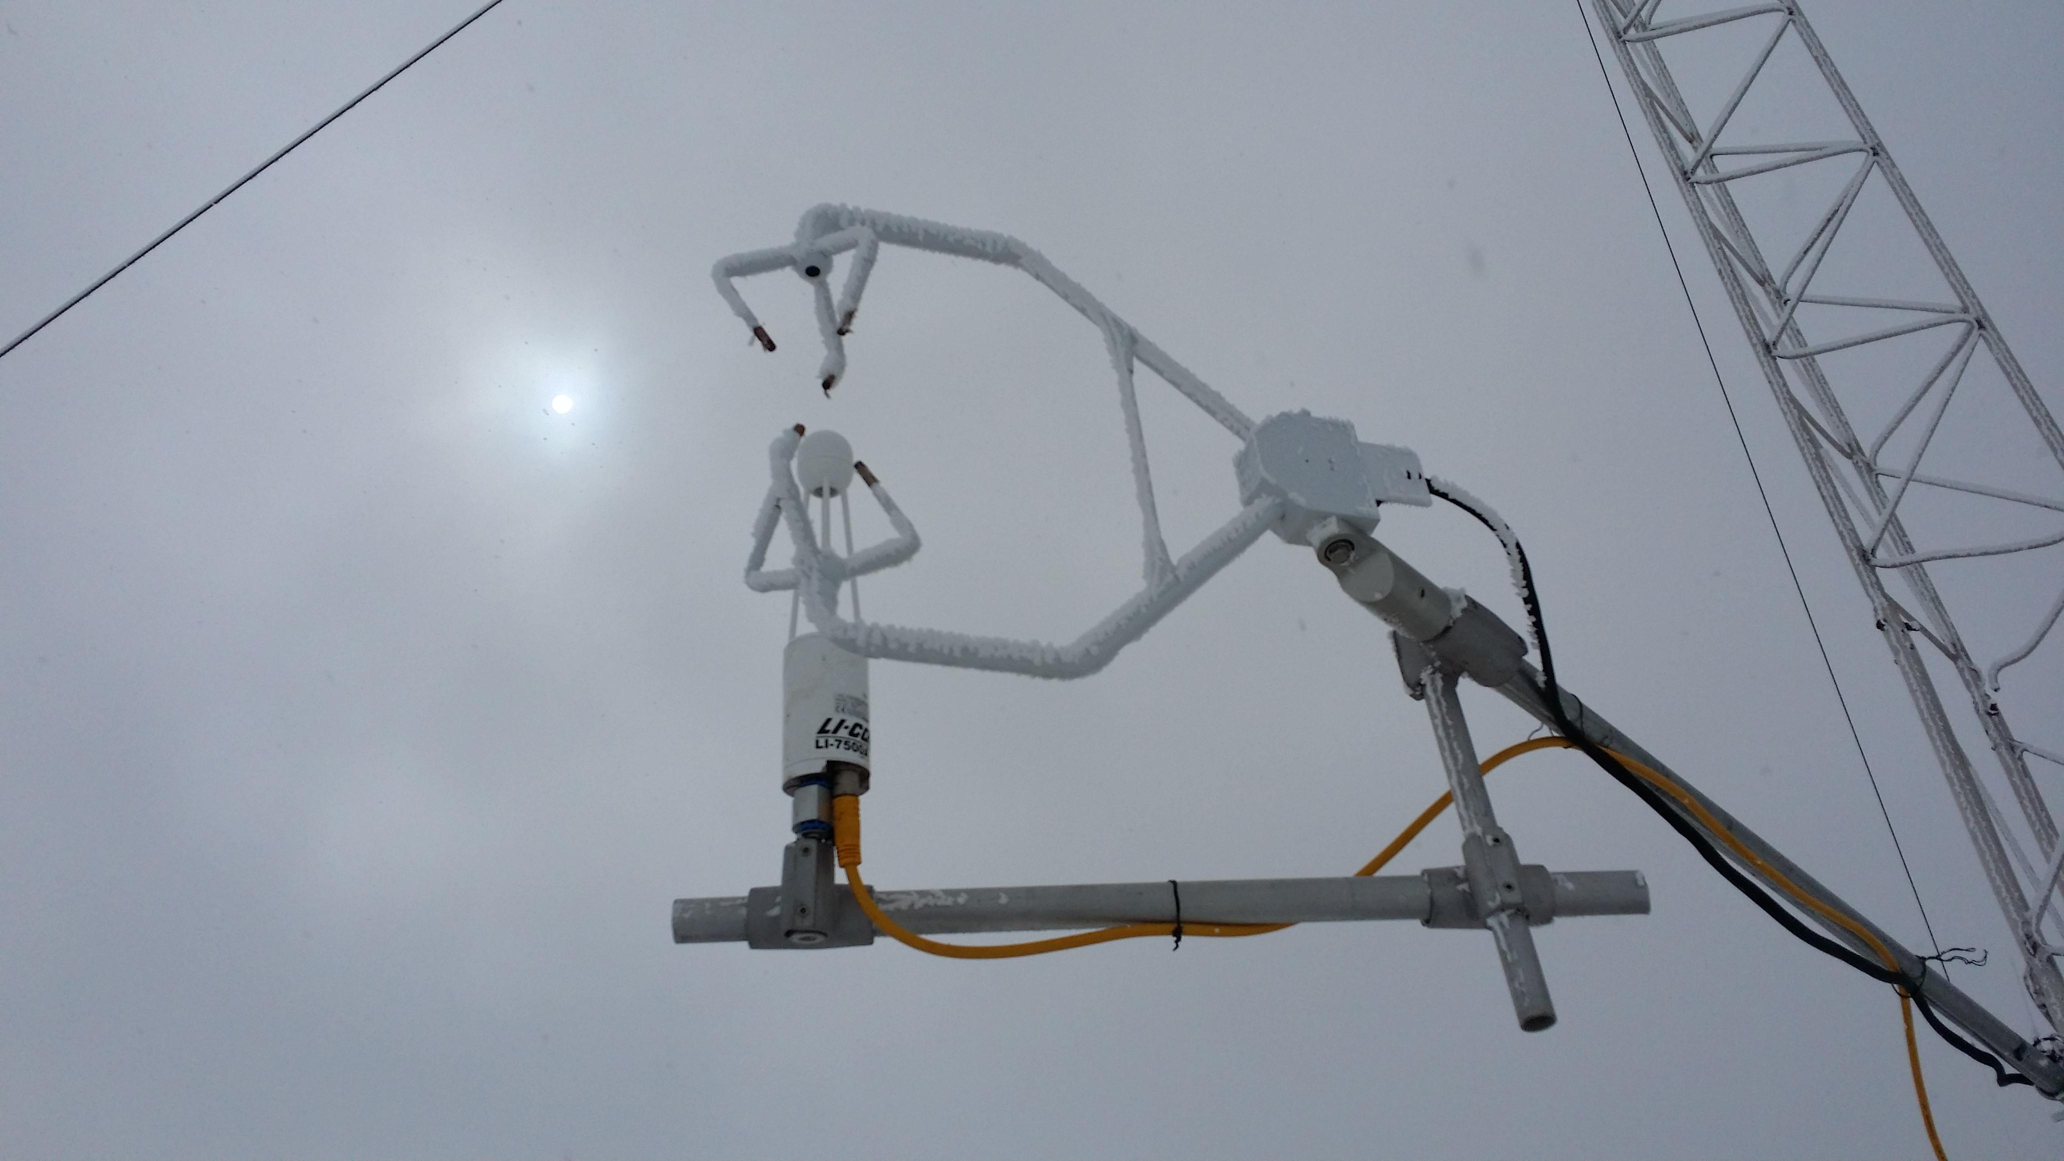 Qilian Mountains integrated observatory network: Dataset of Heihe integrated observatory network (eddy covariance system of Yakou station, 2019)